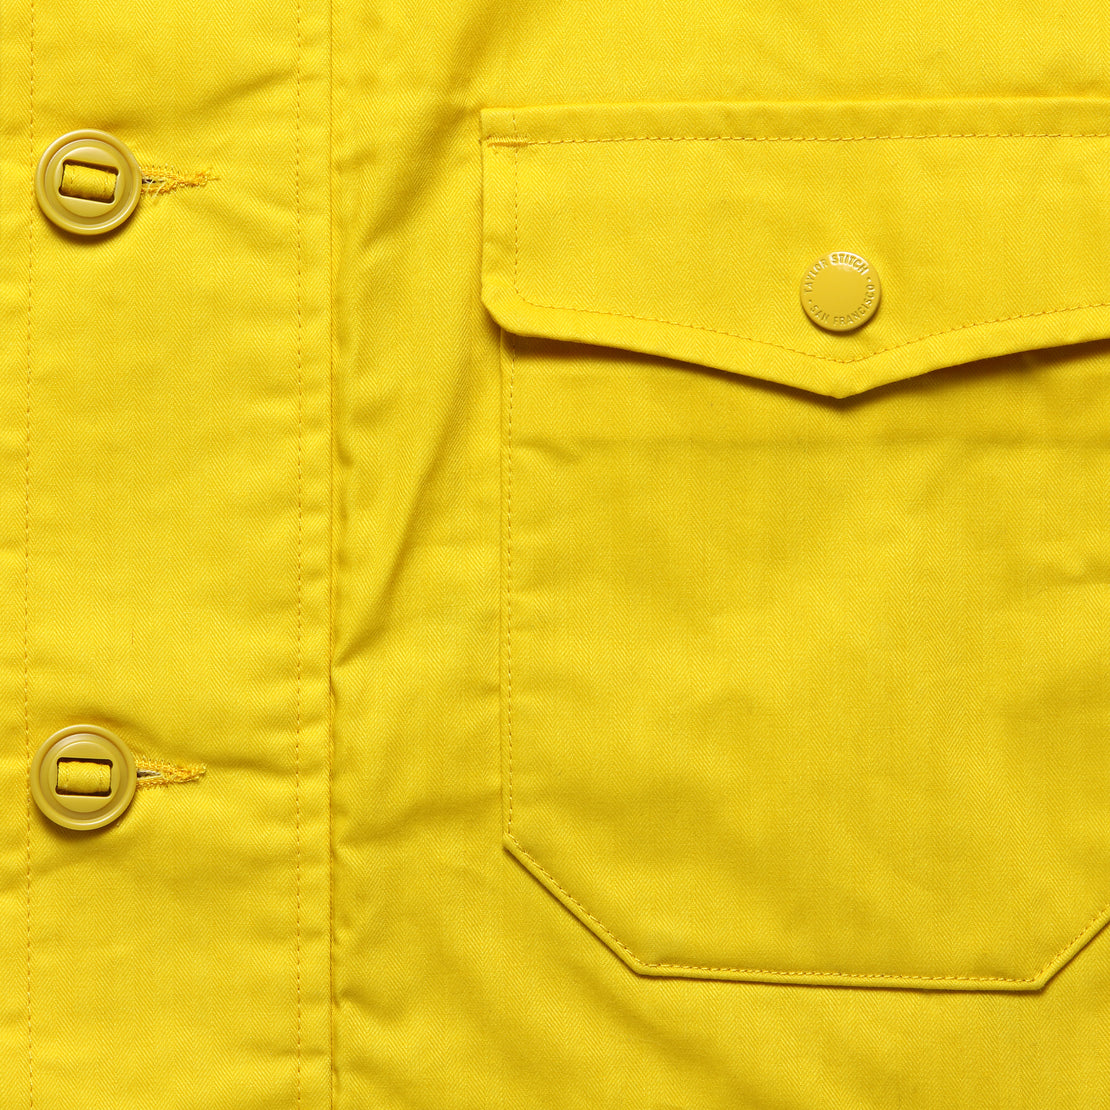 Watts Jacket - Canary - Taylor Stitch - STAG Provisions - Outerwear - Coat / Jacket